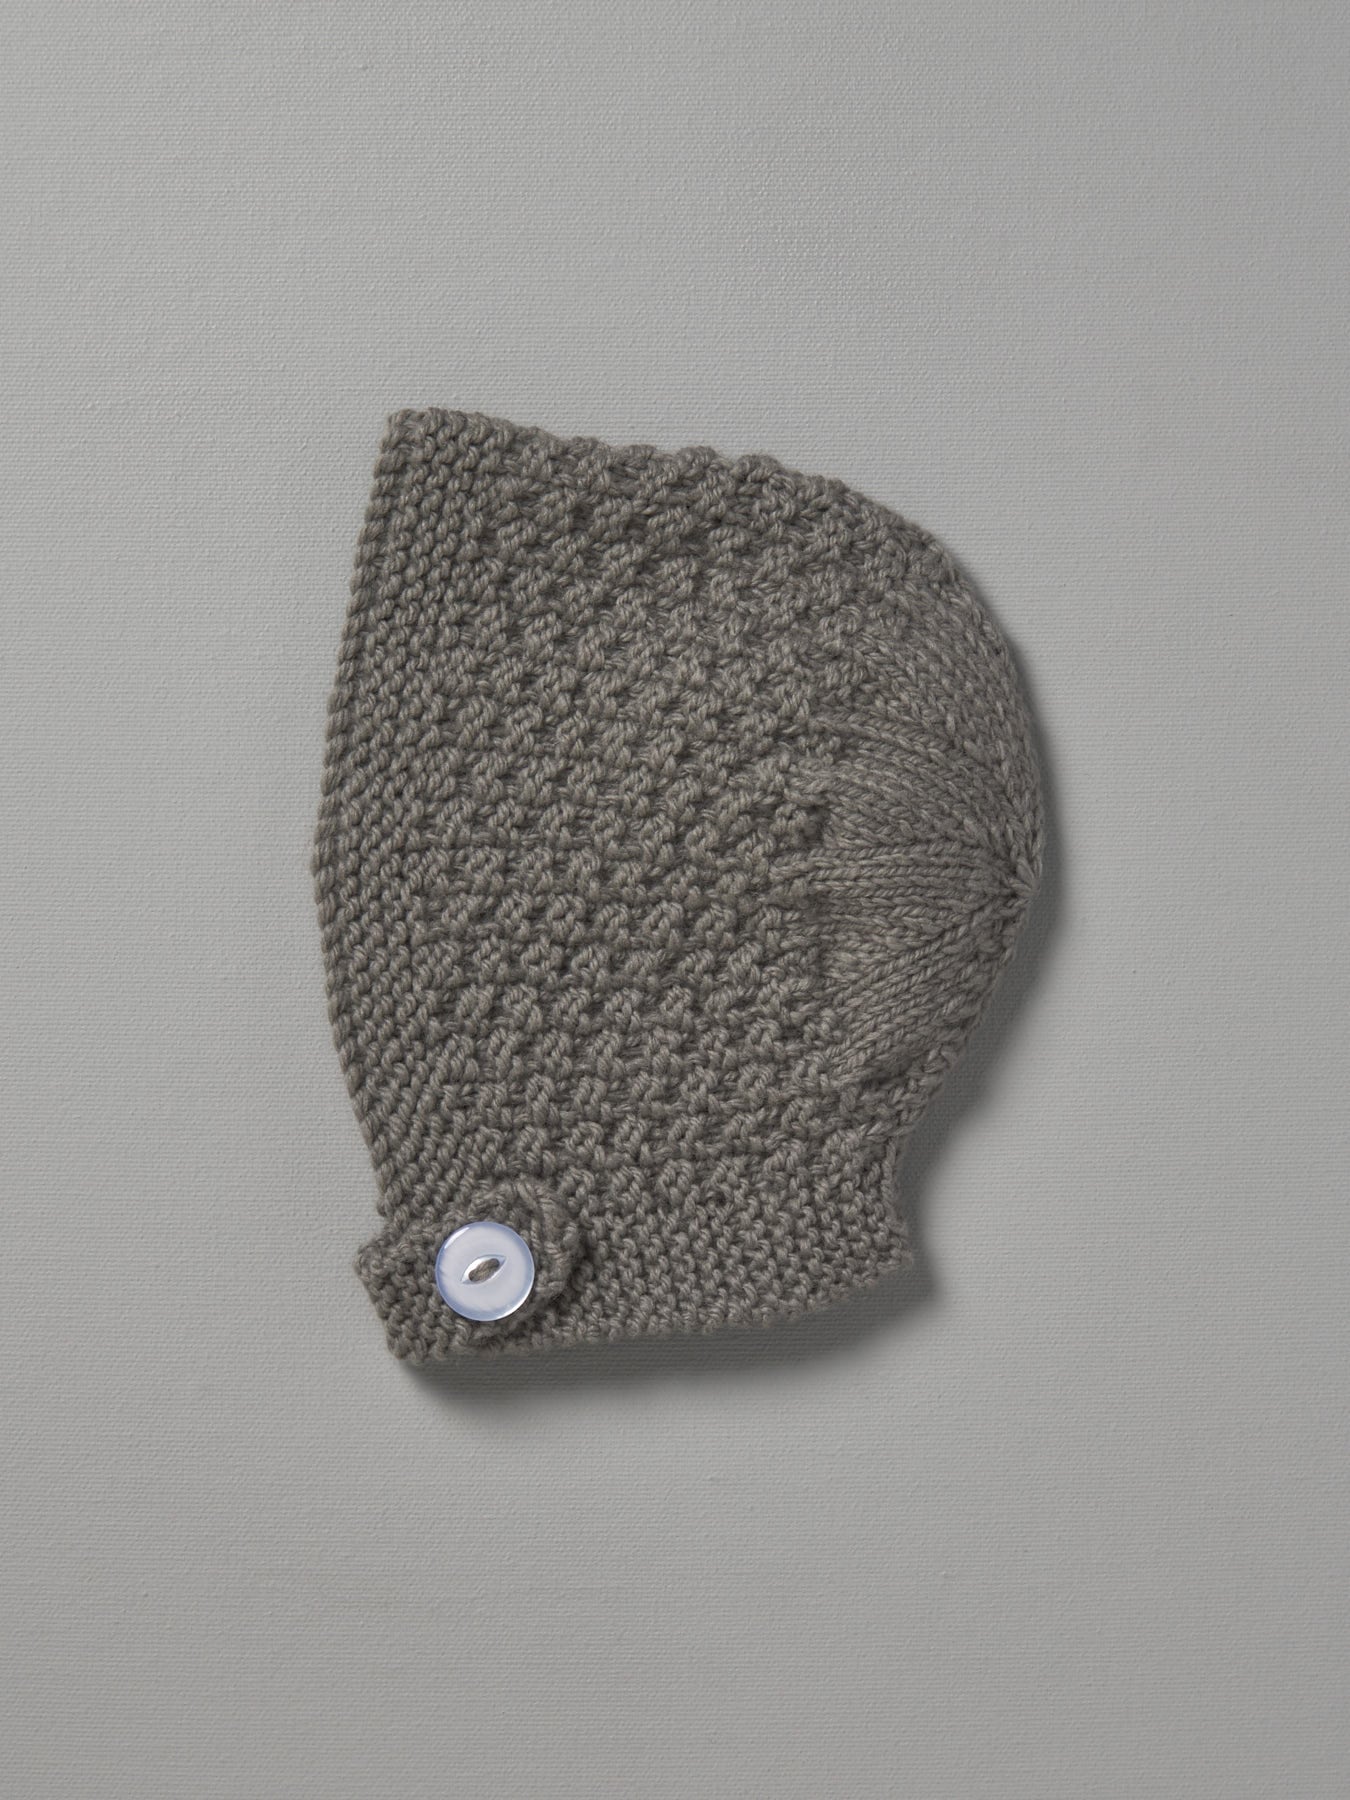 A grey hand knitted baby bonnet - Mushroom with a button on it by Weebits.